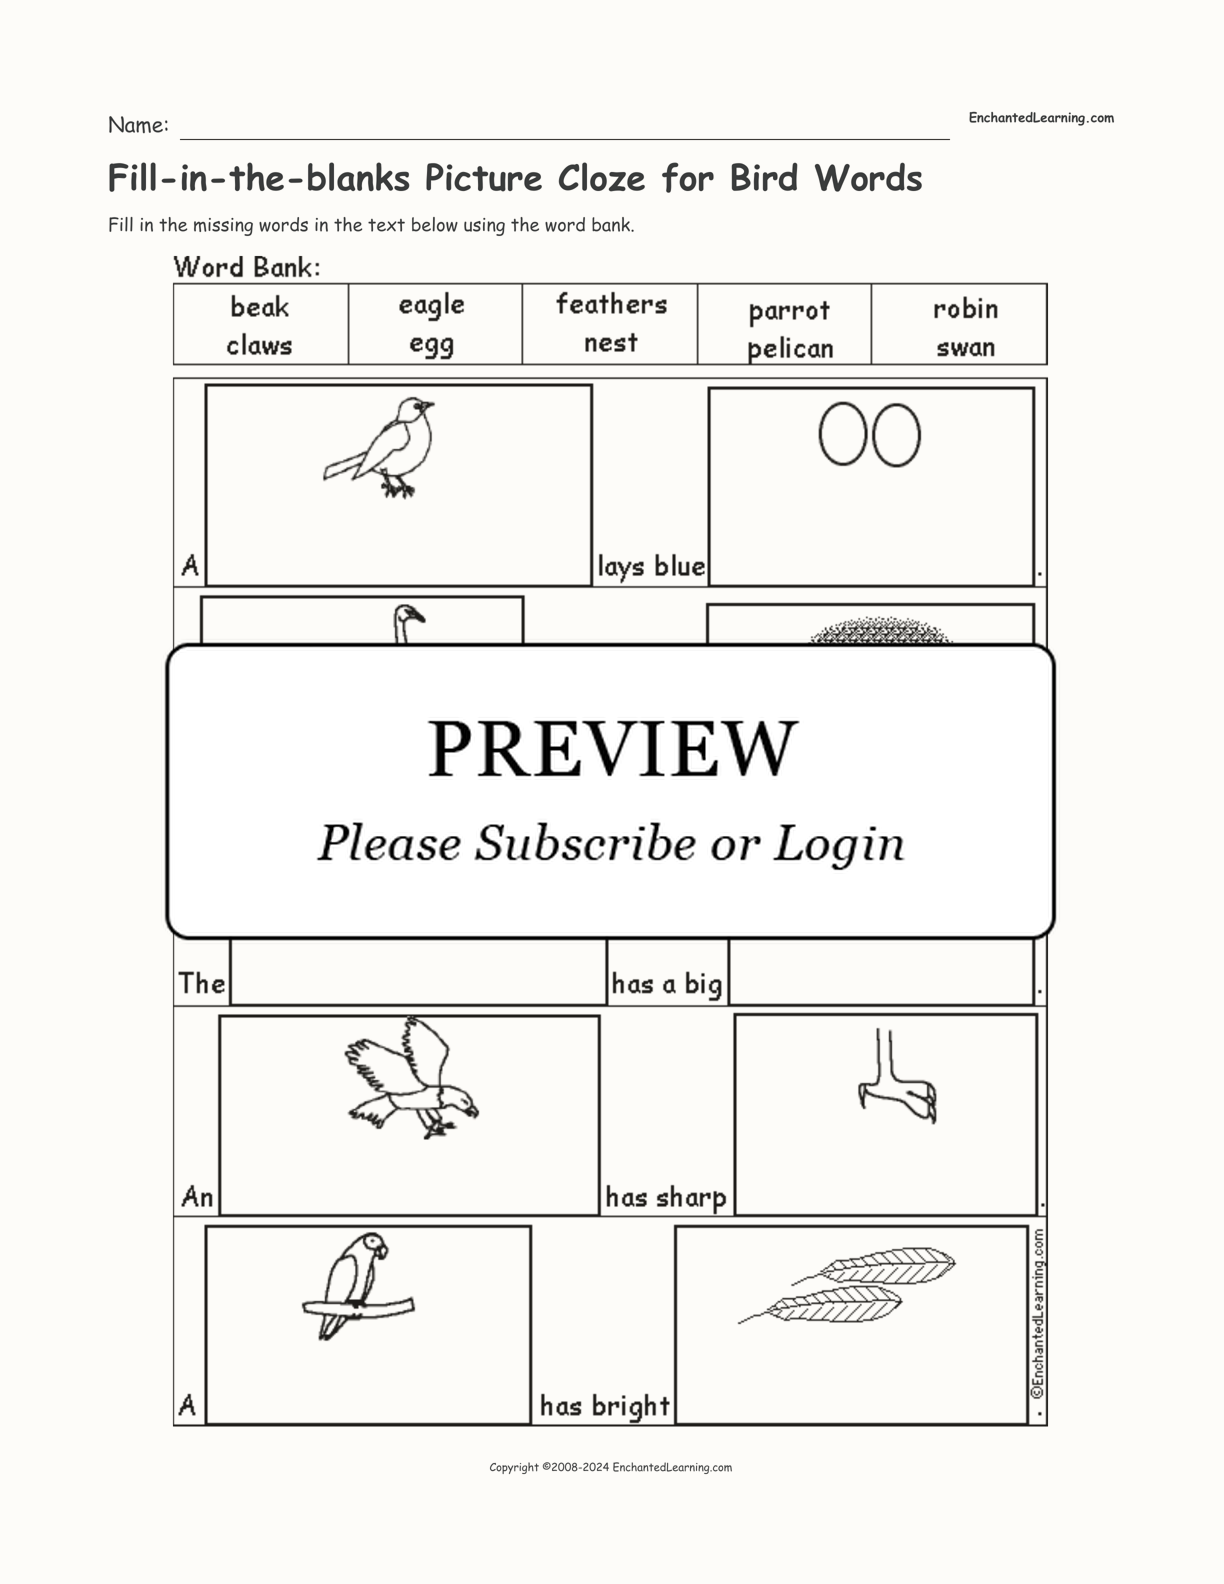 Fill-in-the-blanks Picture Cloze for Bird Words interactive worksheet page 1